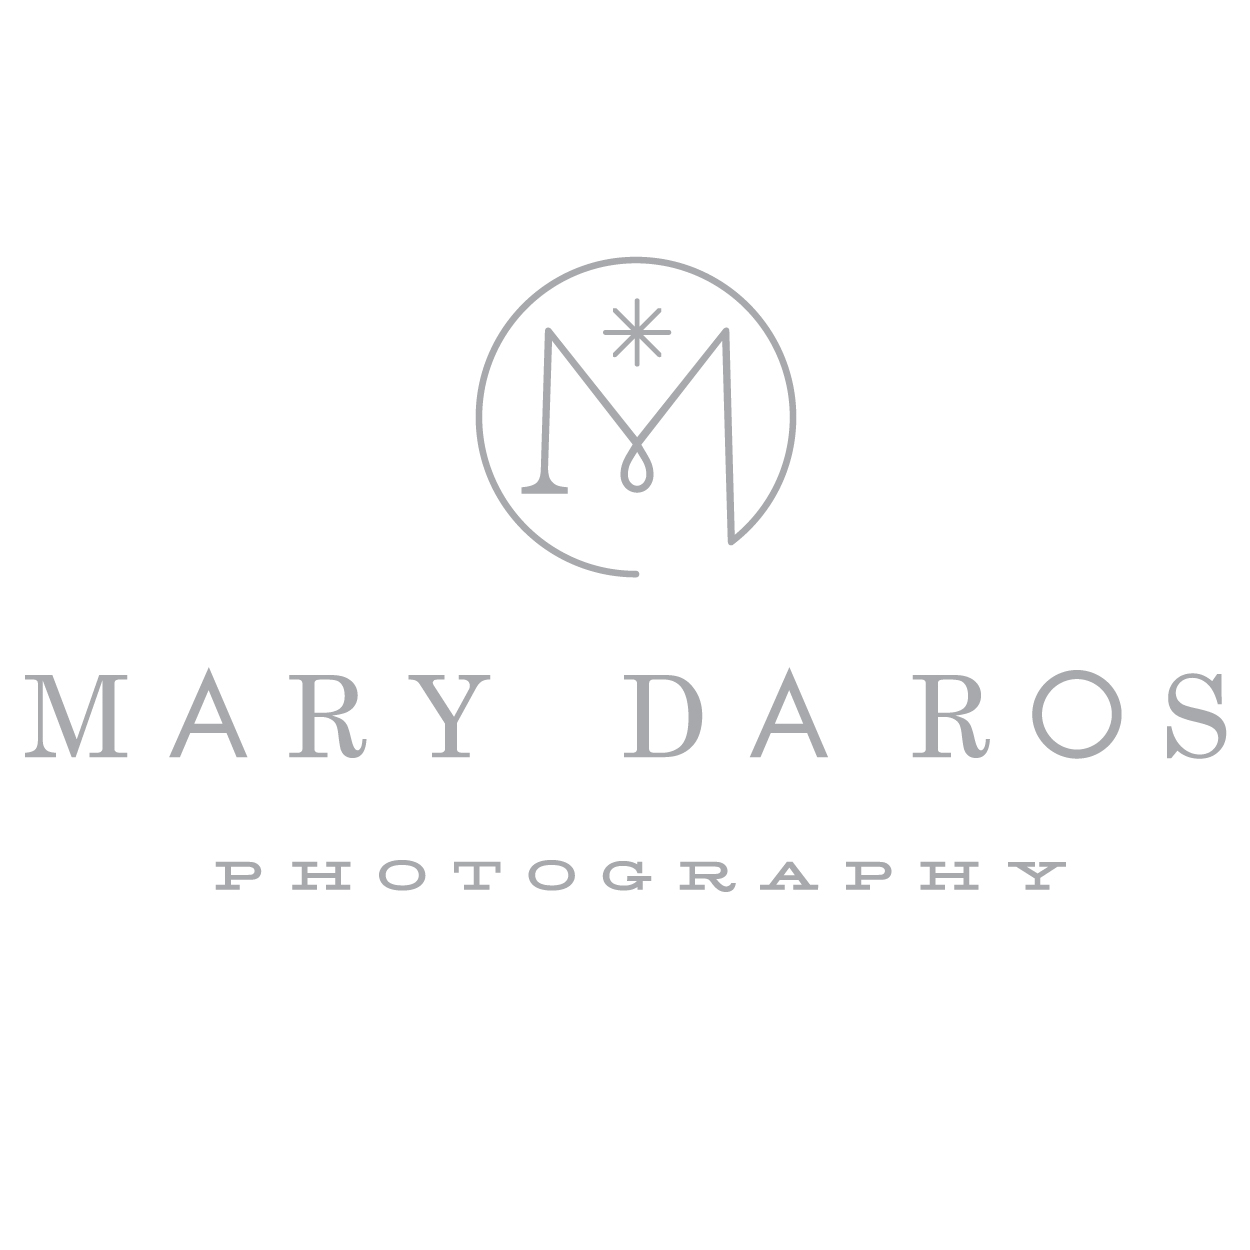 Mary DaRos Photo logo design by logo designer Funnel : Eric Kass for your inspiration and for the worlds largest logo competition